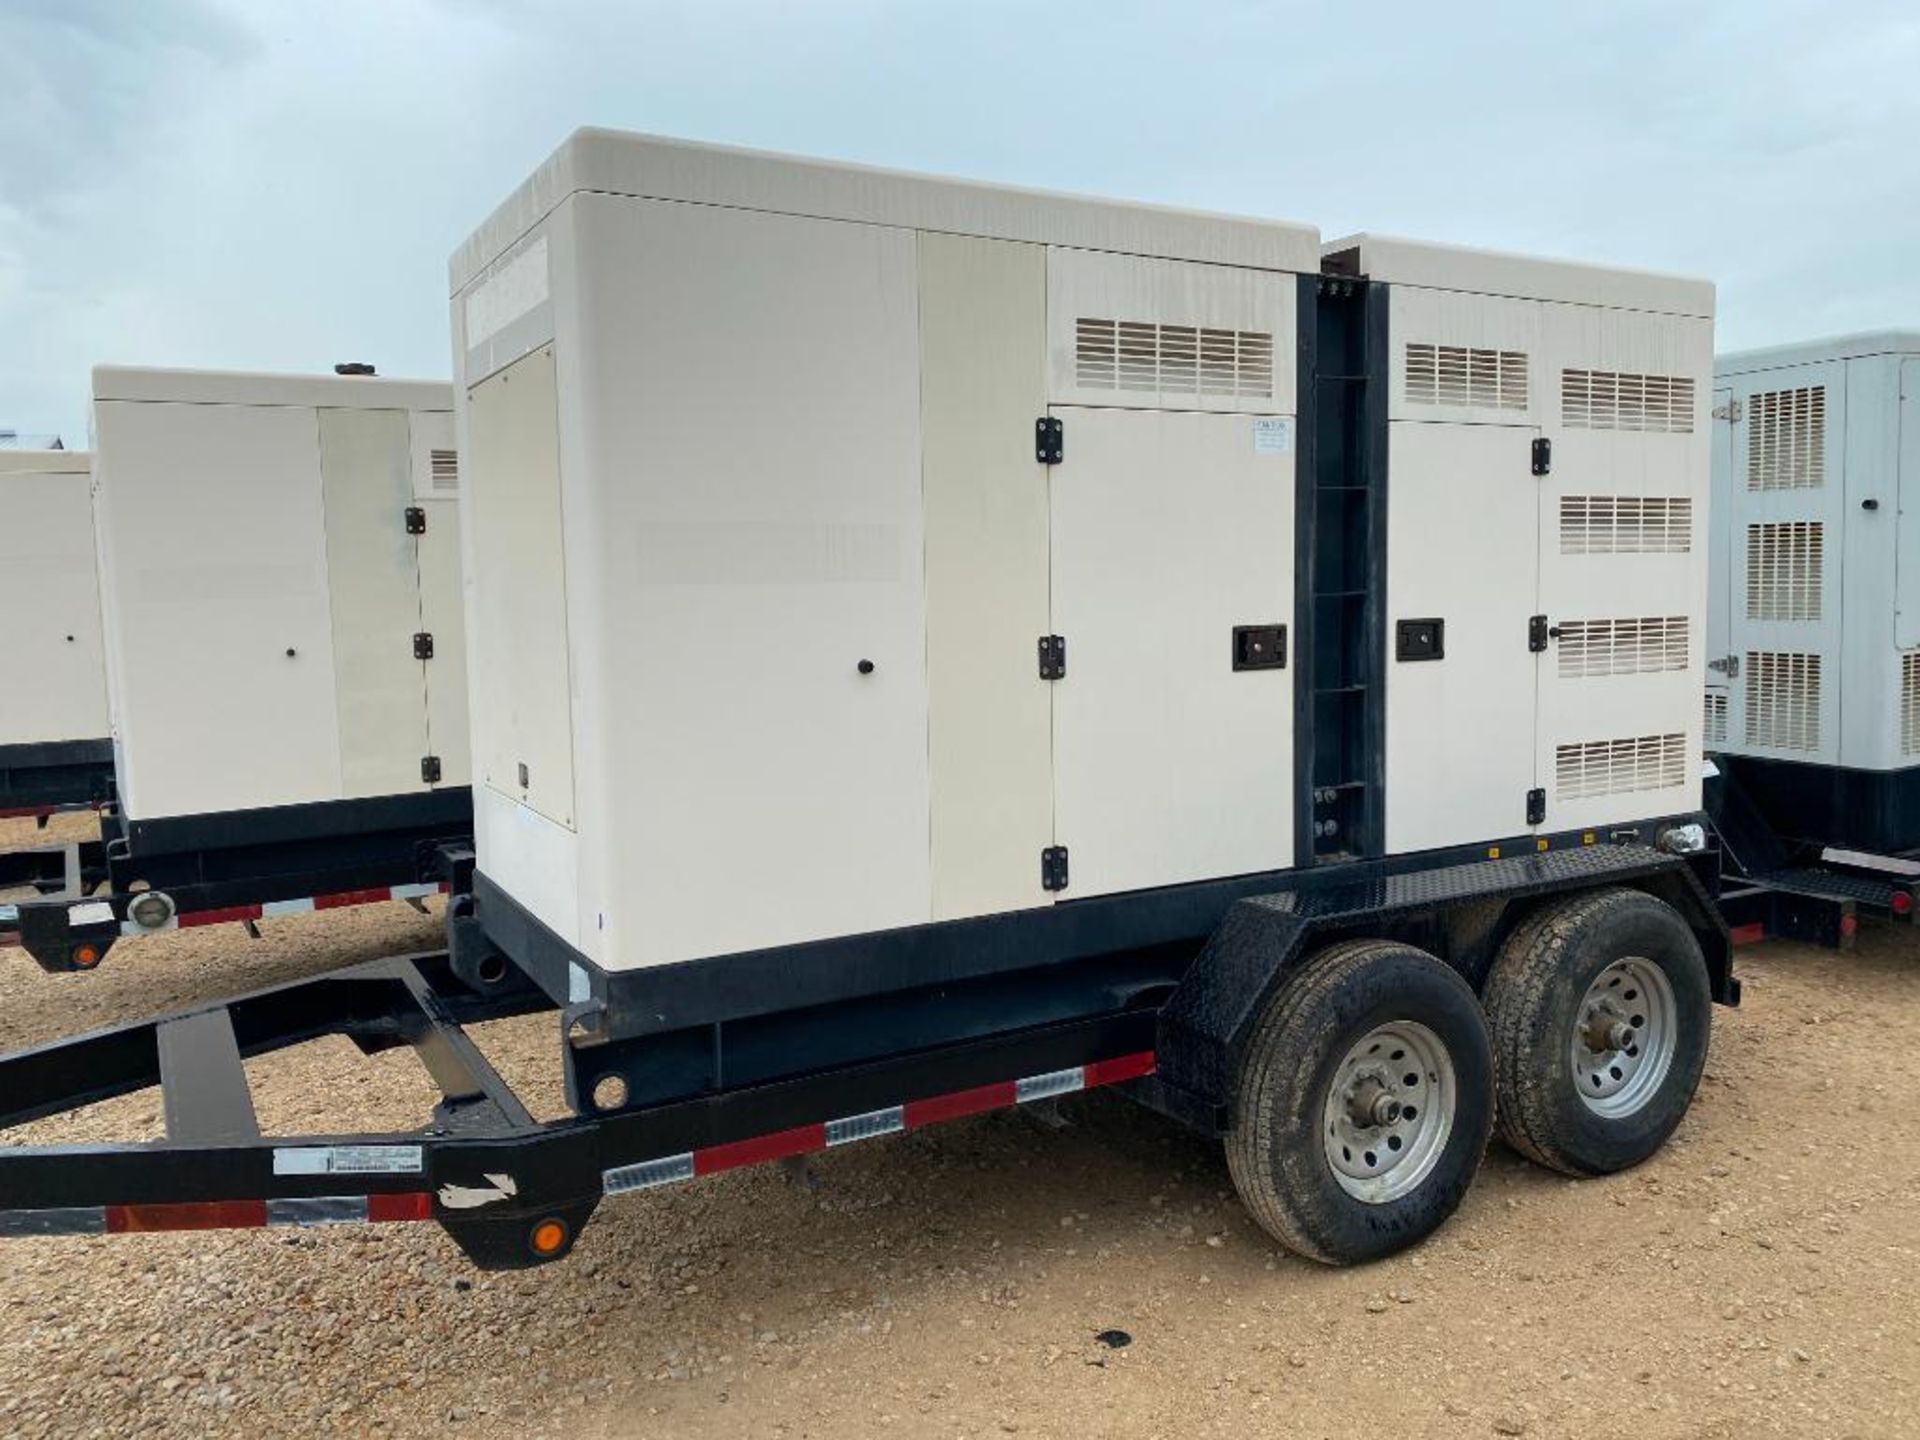 2014 AltaStream Power Systems 125 KVA Towable Generator, Dual Fuel Natural Gas or LP, Model APHG150- - Image 4 of 14